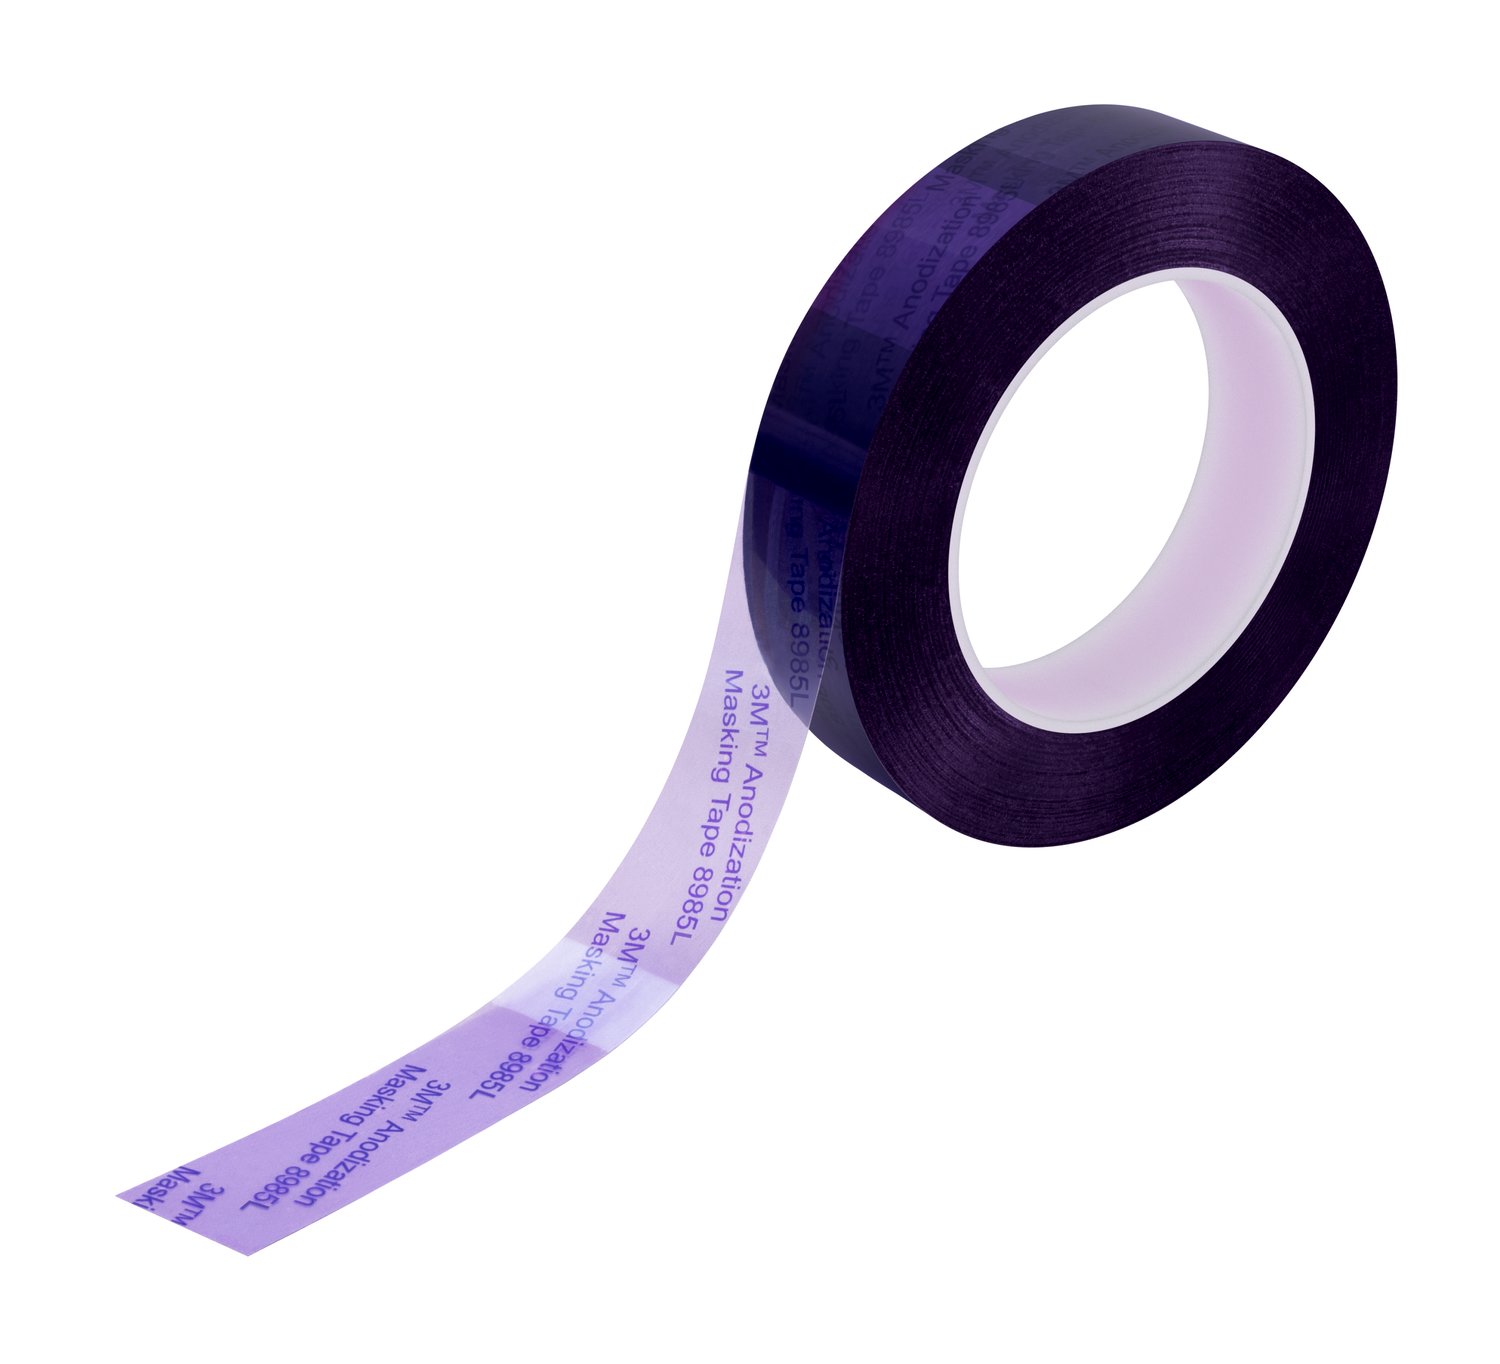 7100206549 - 3M Anodization Masking Tape 8985L, Purple, Roll, Config